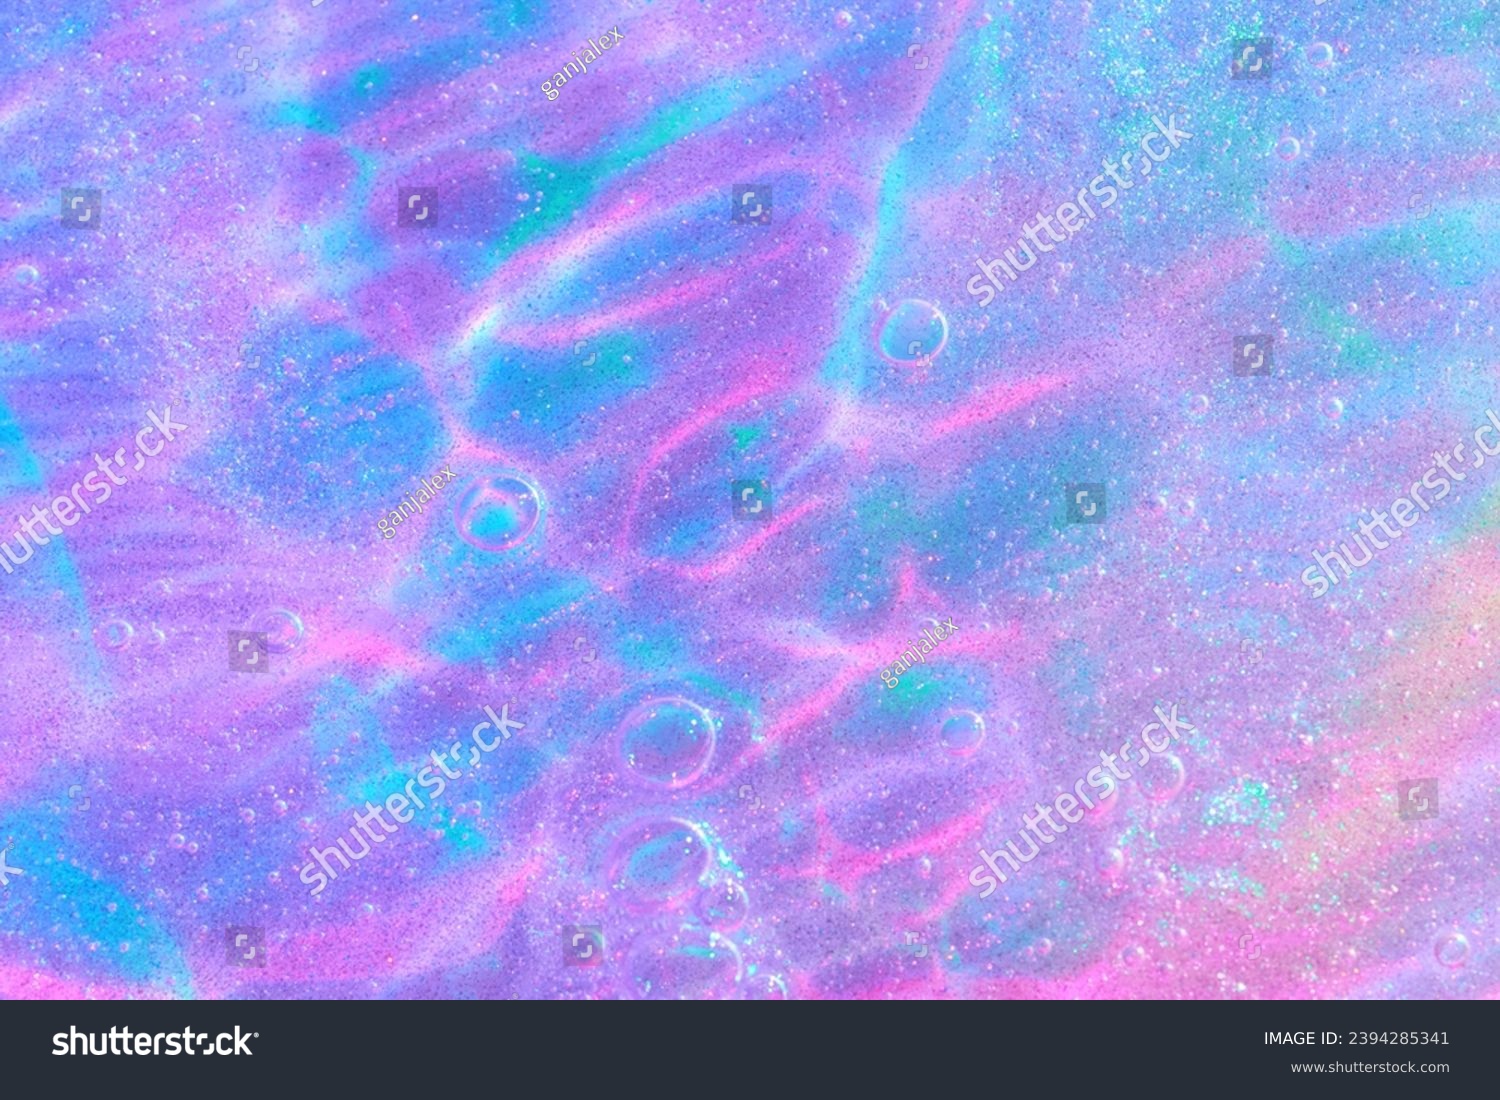 Beautiful neon purple, pink and blue transparent space alien glitter slime background texture. Sparkle cosmic, surreal abstract backdrop, ethereal, liquid art gel galaxy substance. #2394285341